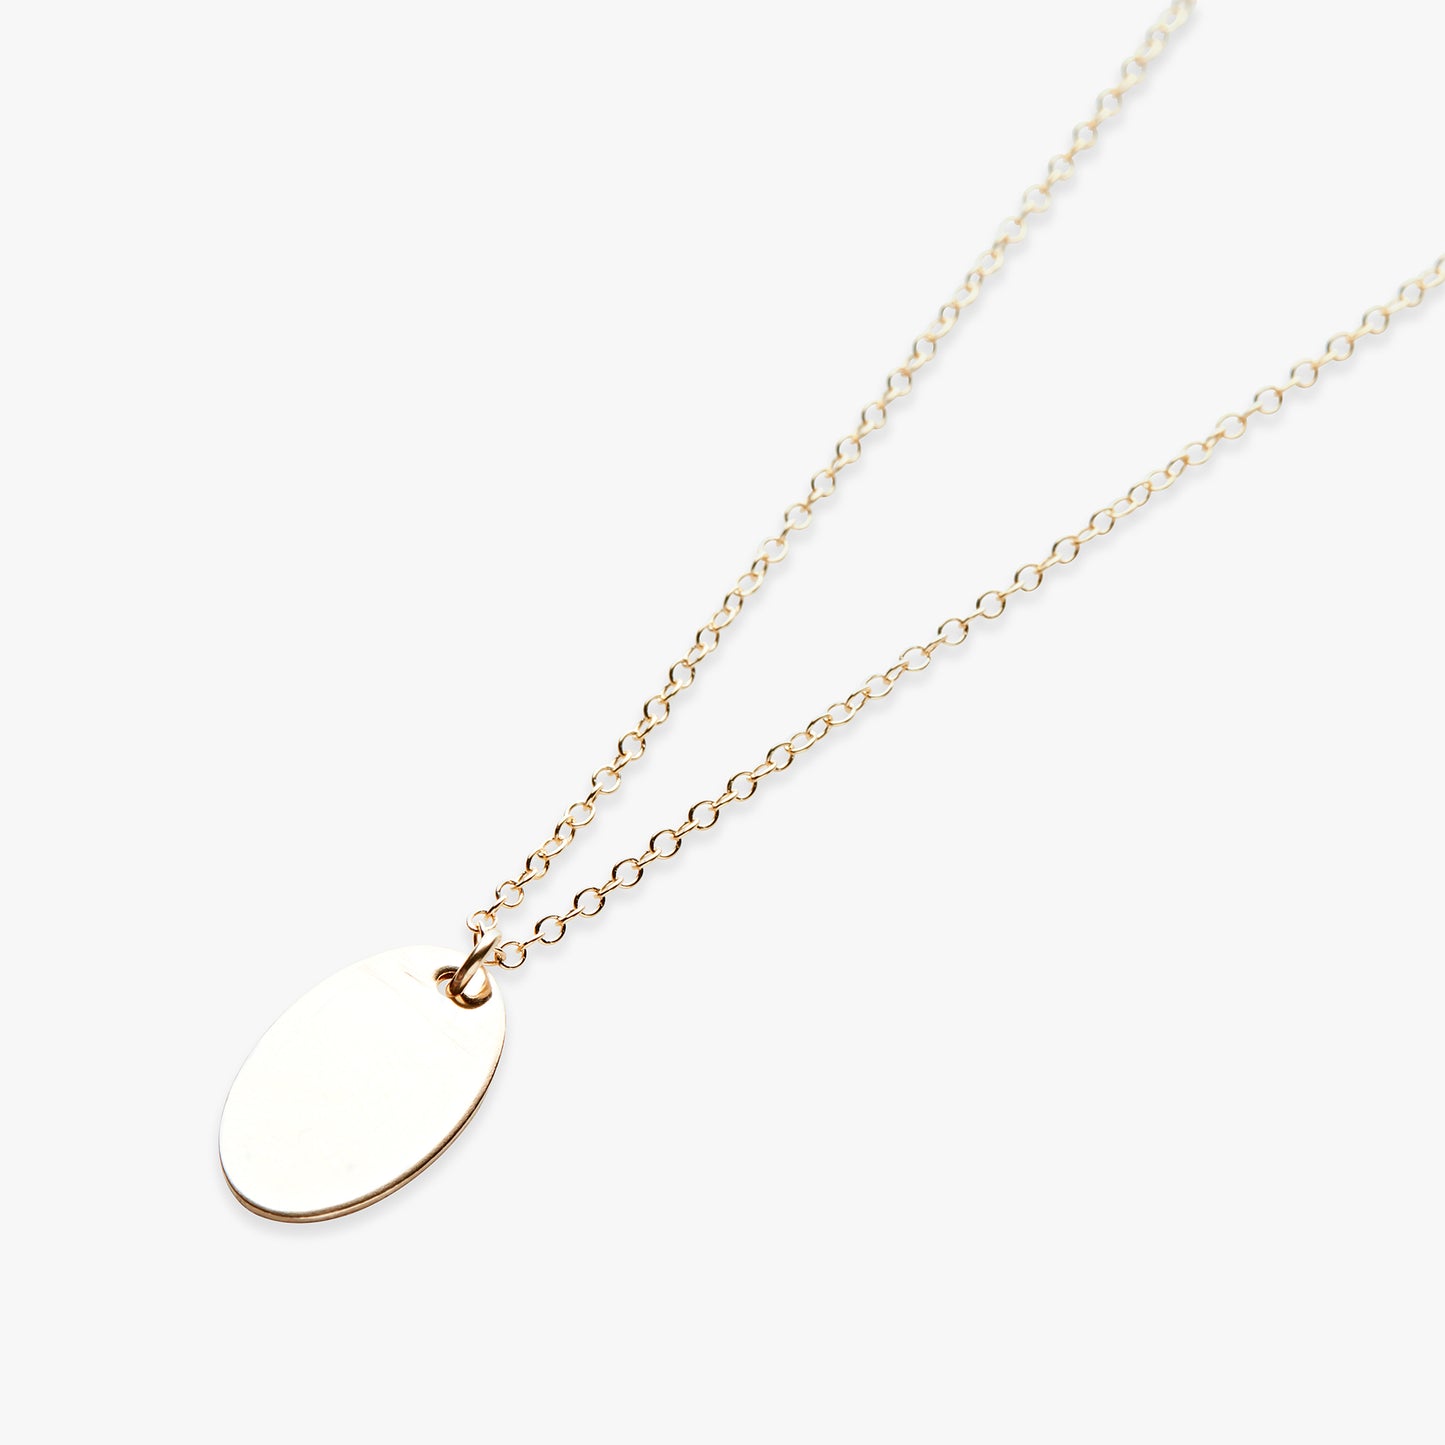 Grote ovale hanger ketting gold filled